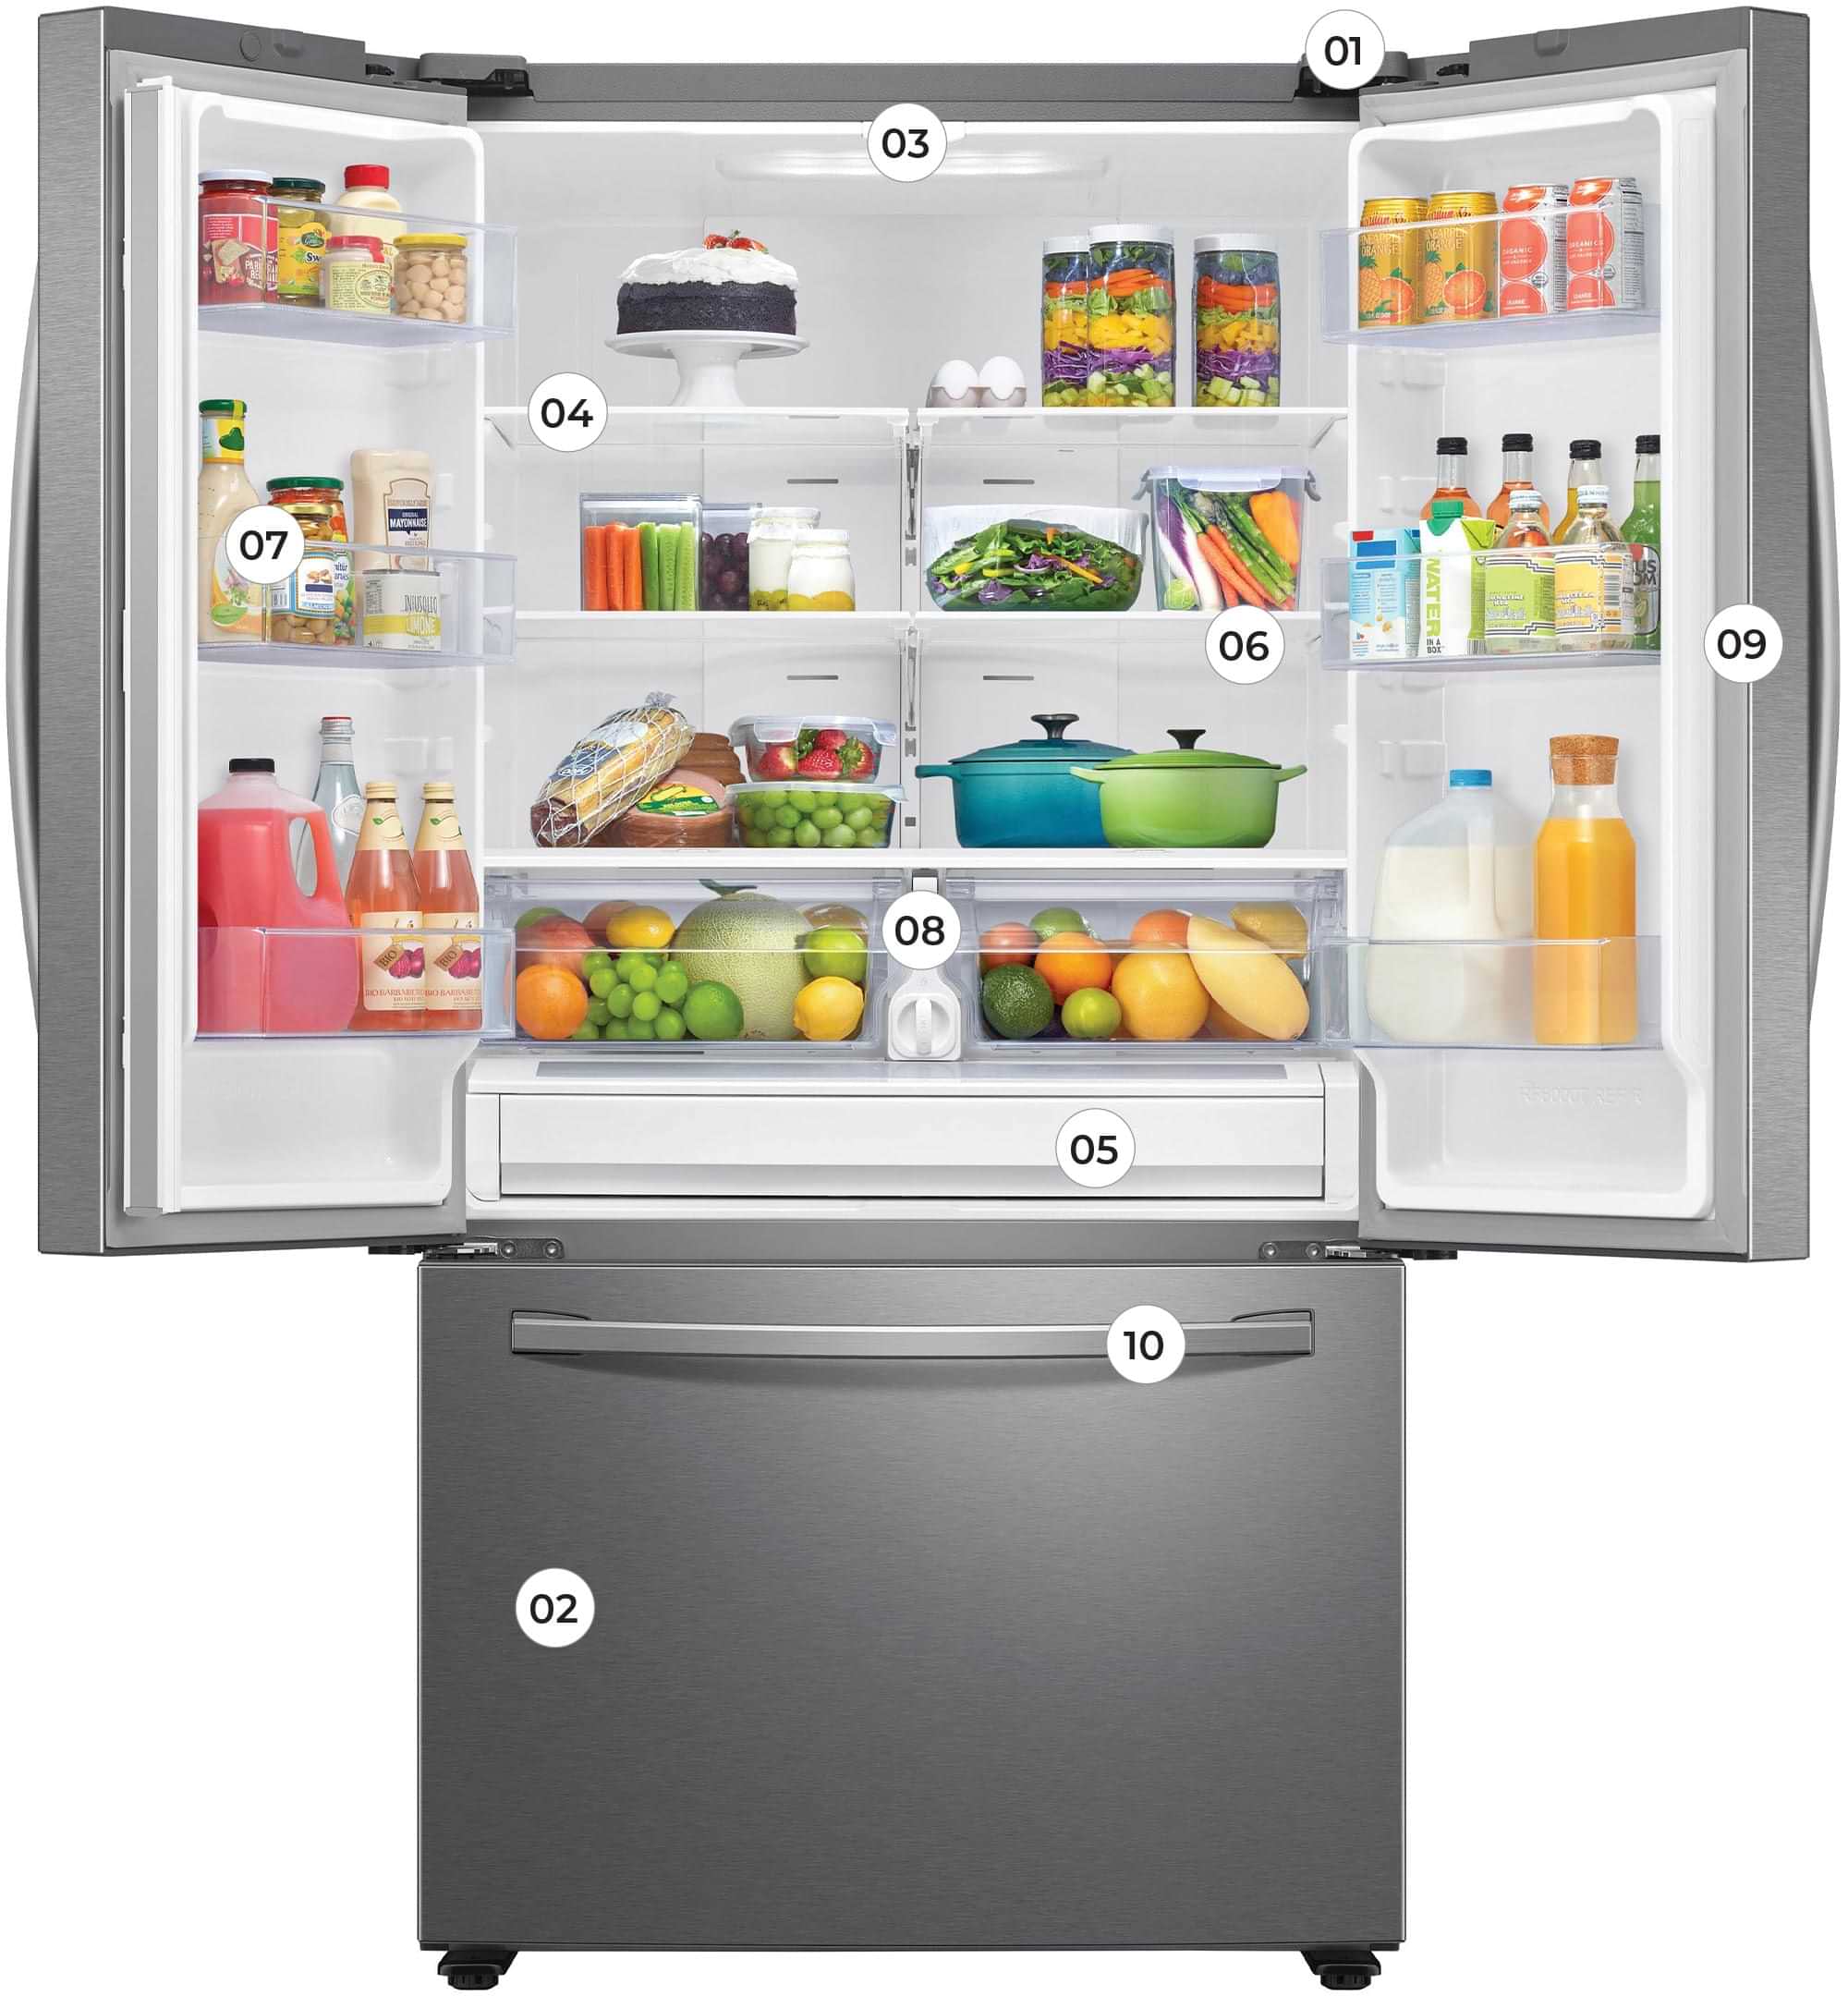 Samsung 36-Inch 3-Door French Door Refrigerator with both doors open and stocked with food and drink